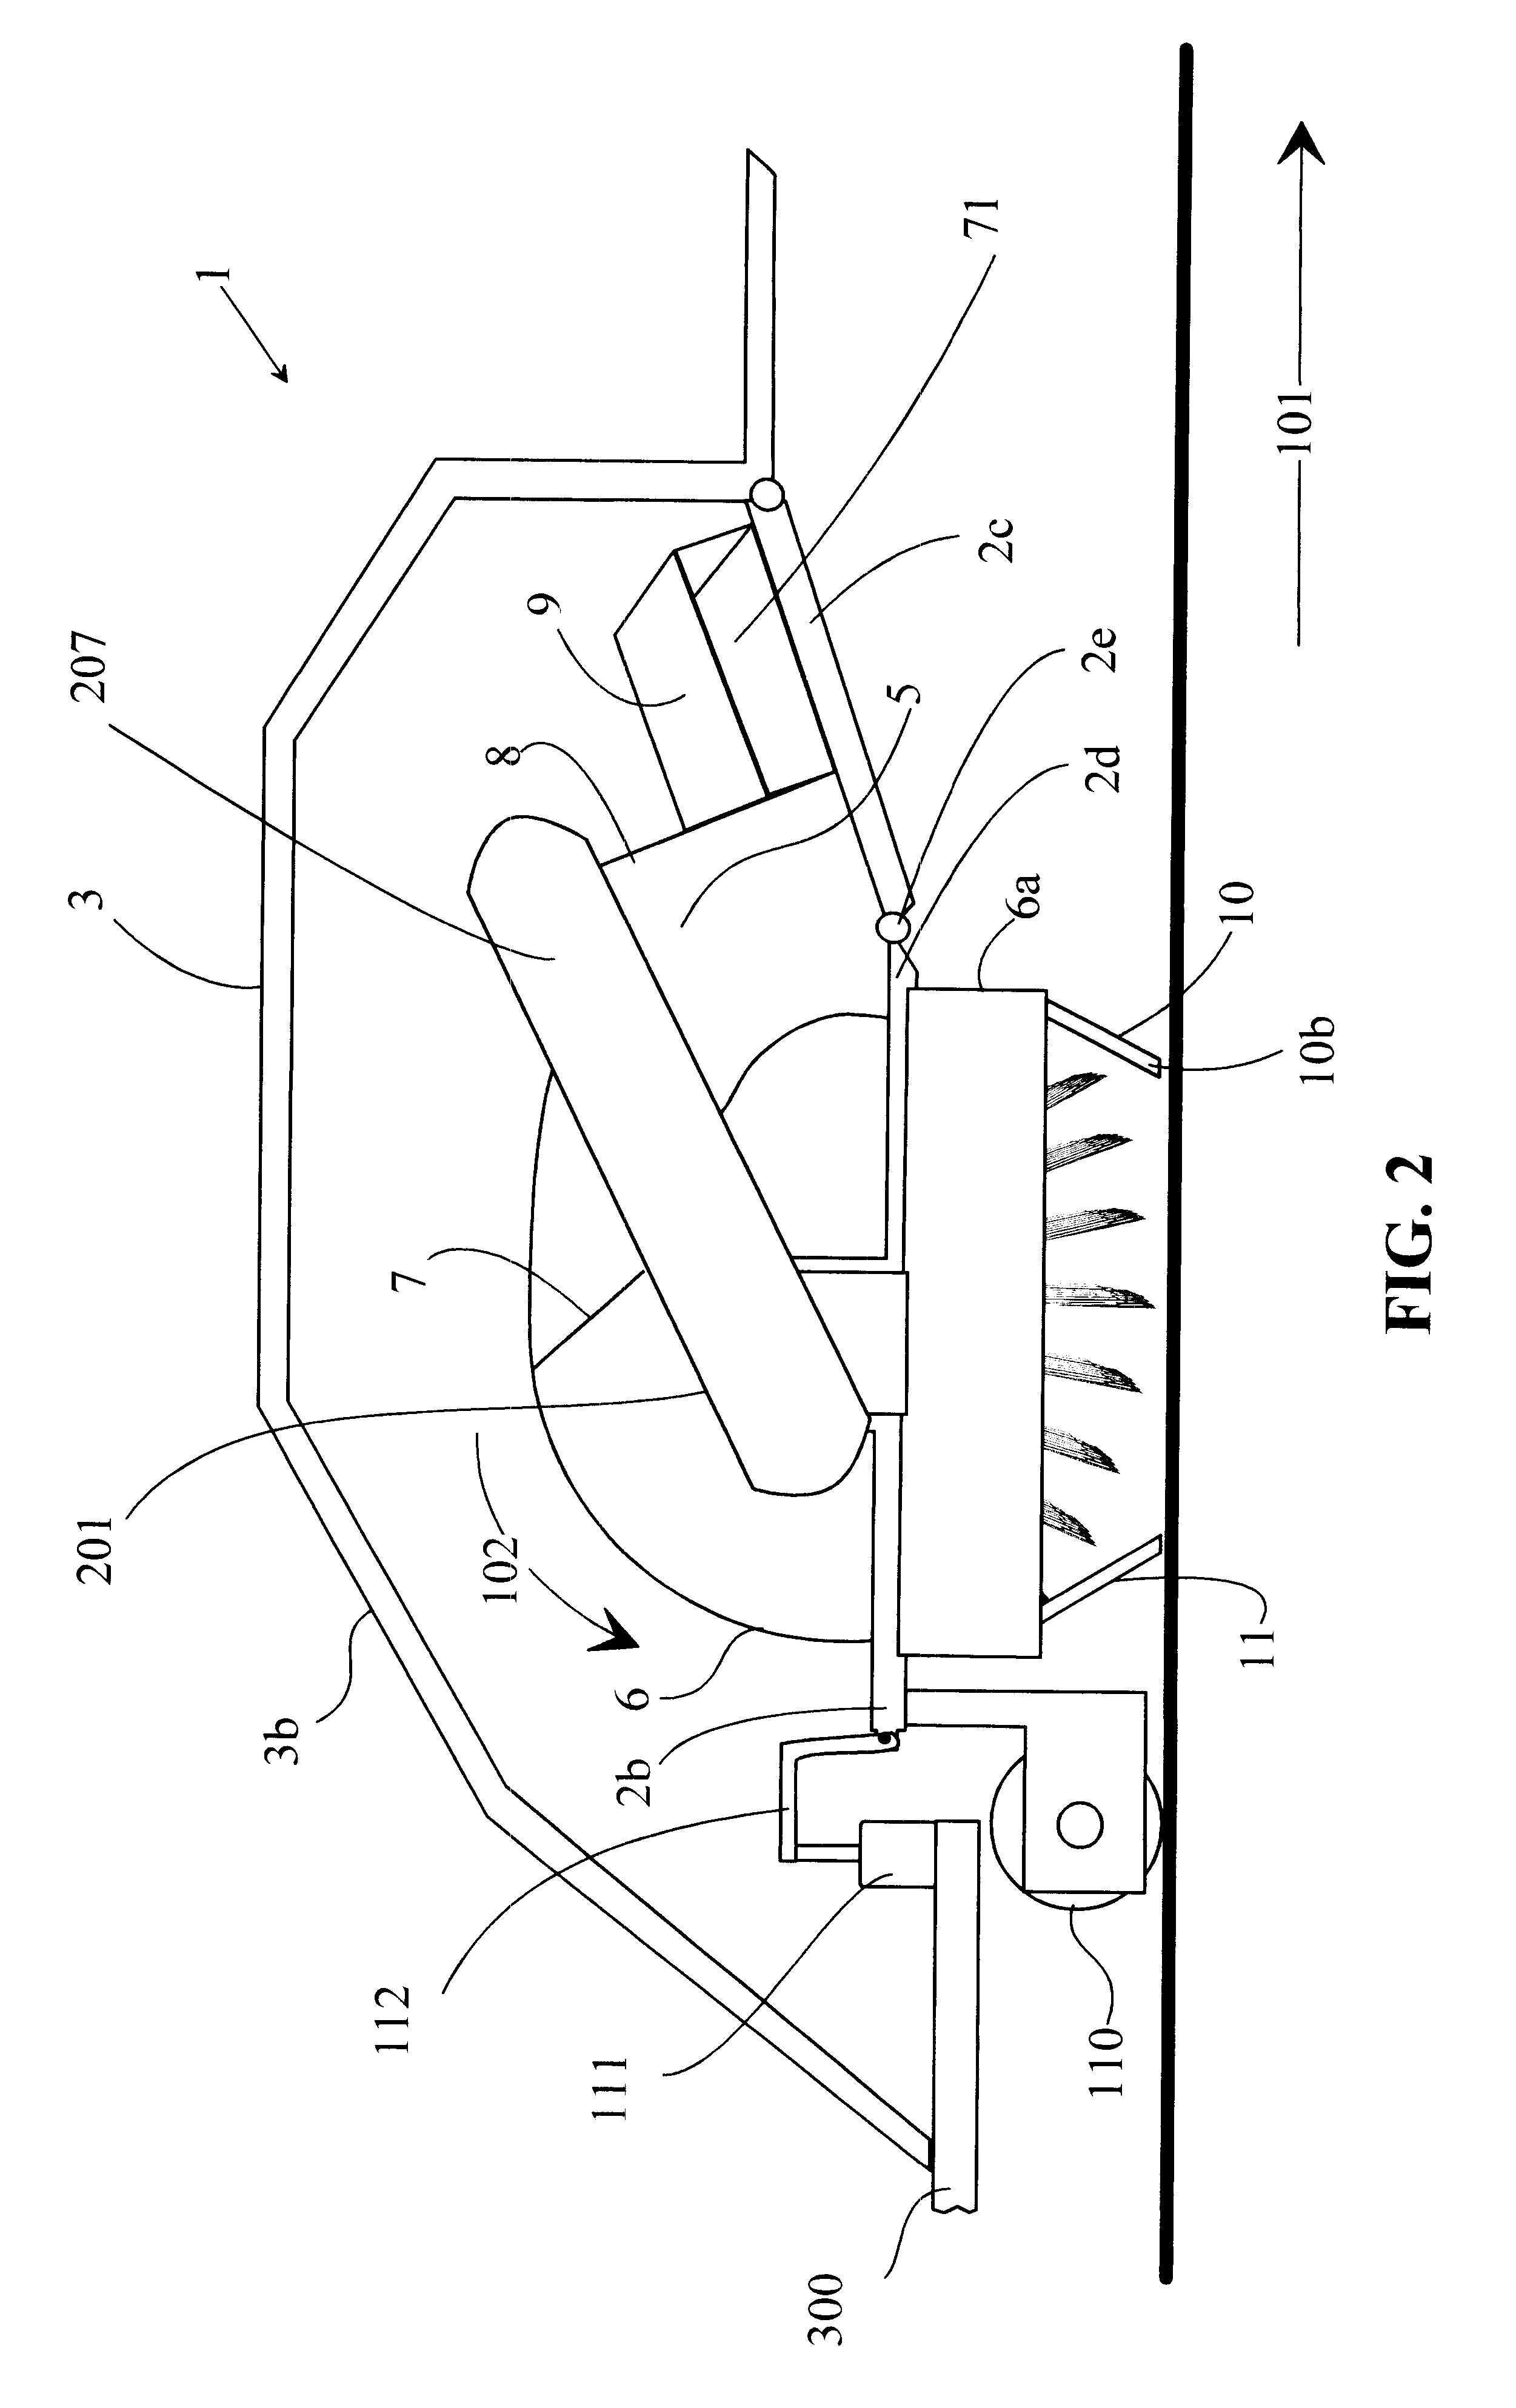 Device for removing snow and other debris from ground surfaces